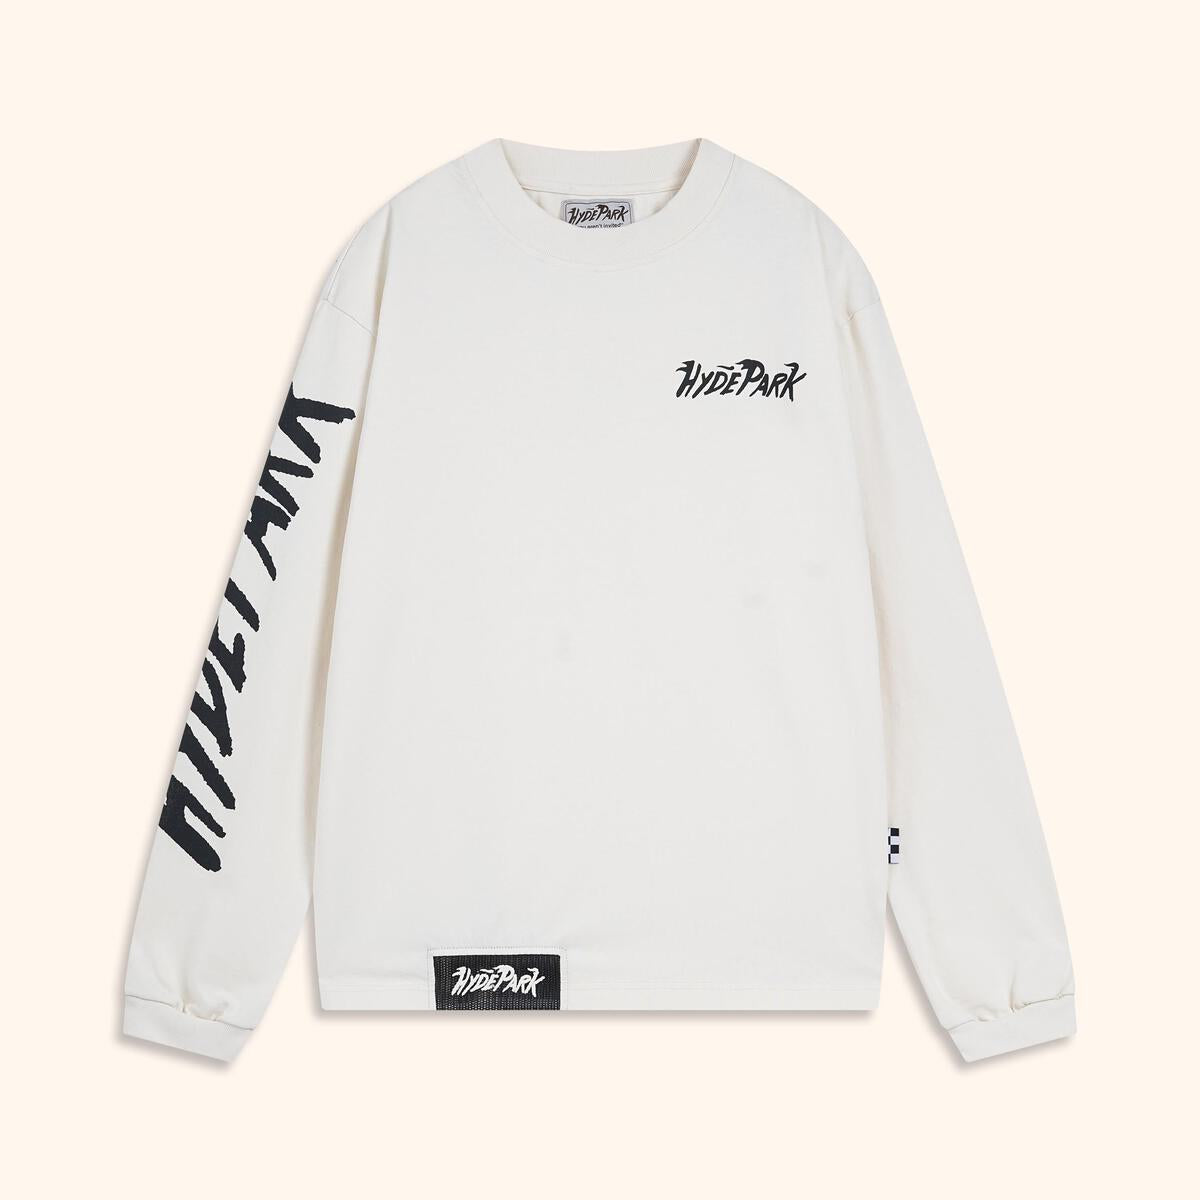 START YOUR ENGINES LONG SLEEVE - WHITE